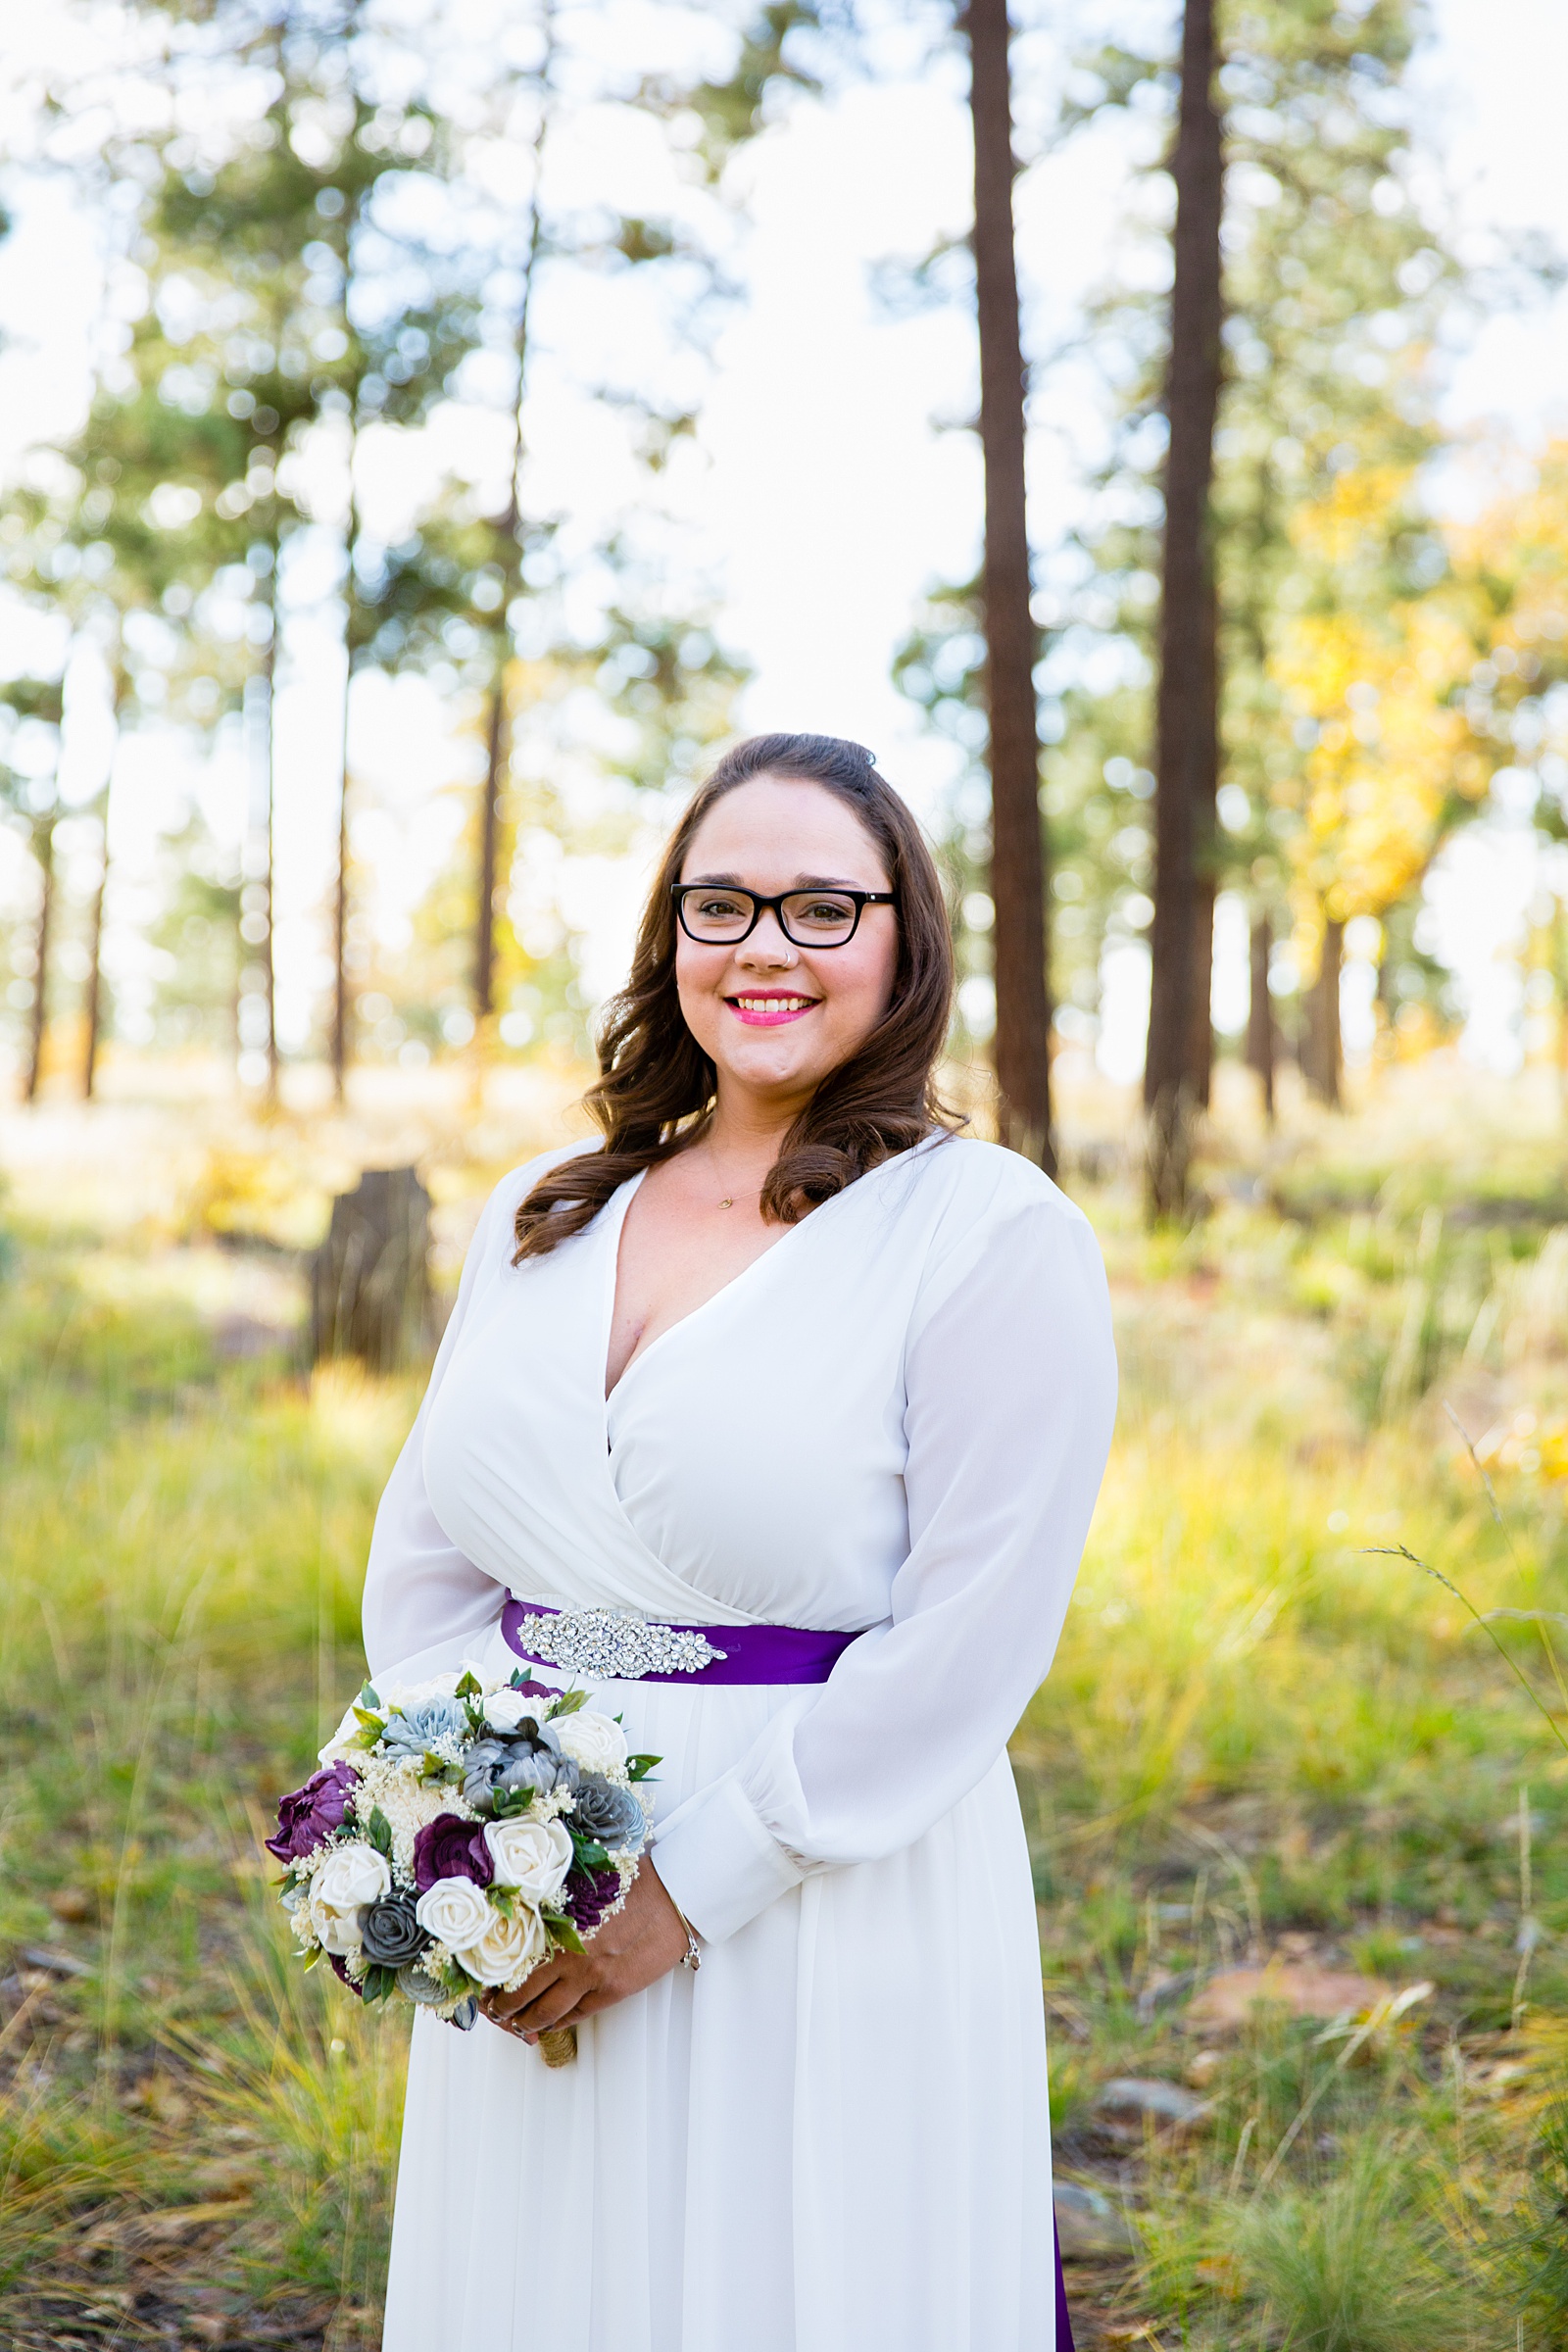 Bride's simple, sleeved wedding dress with a purple sash and wooden floral bouquet for her Mogollon Rim elopement by PMA Photography.